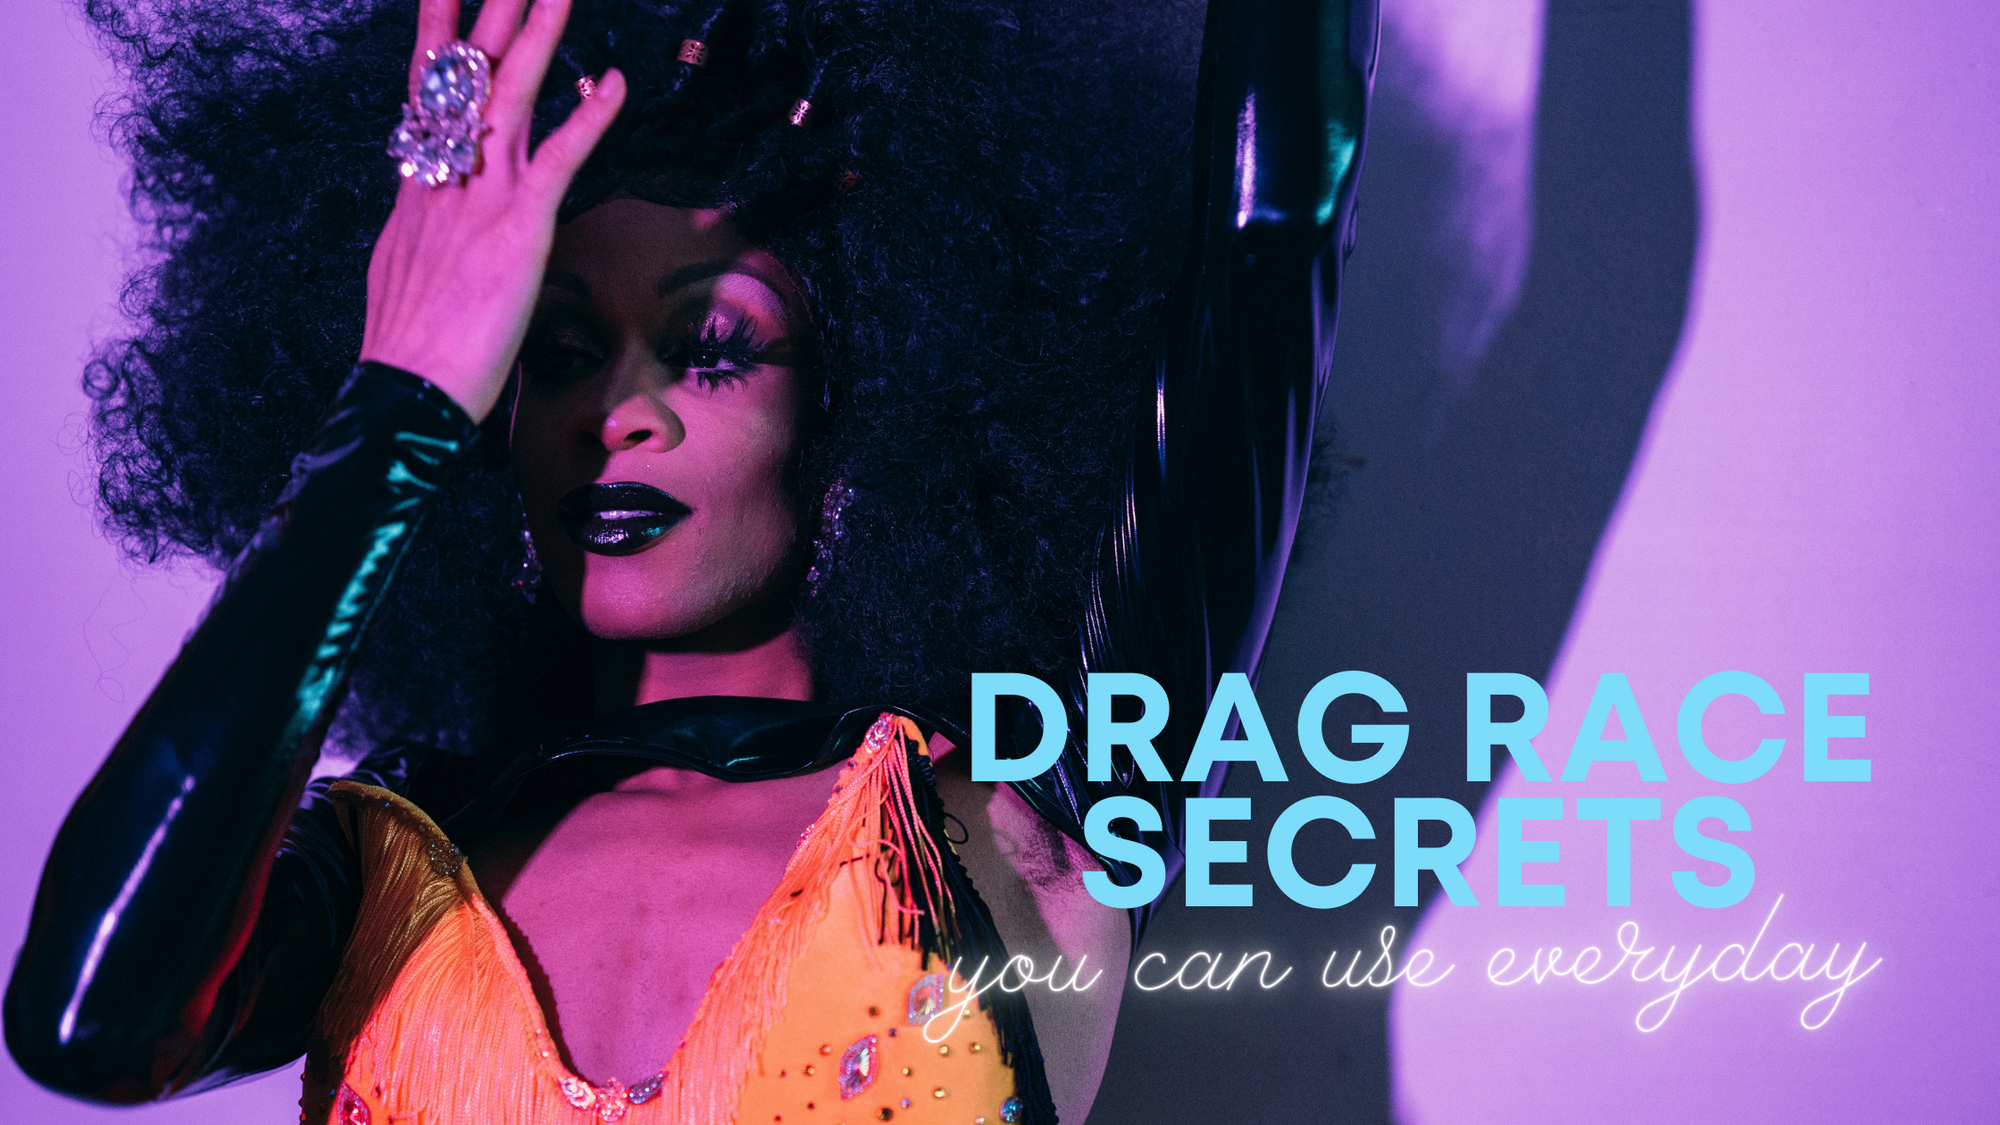 Drag race secrets you can use everyday